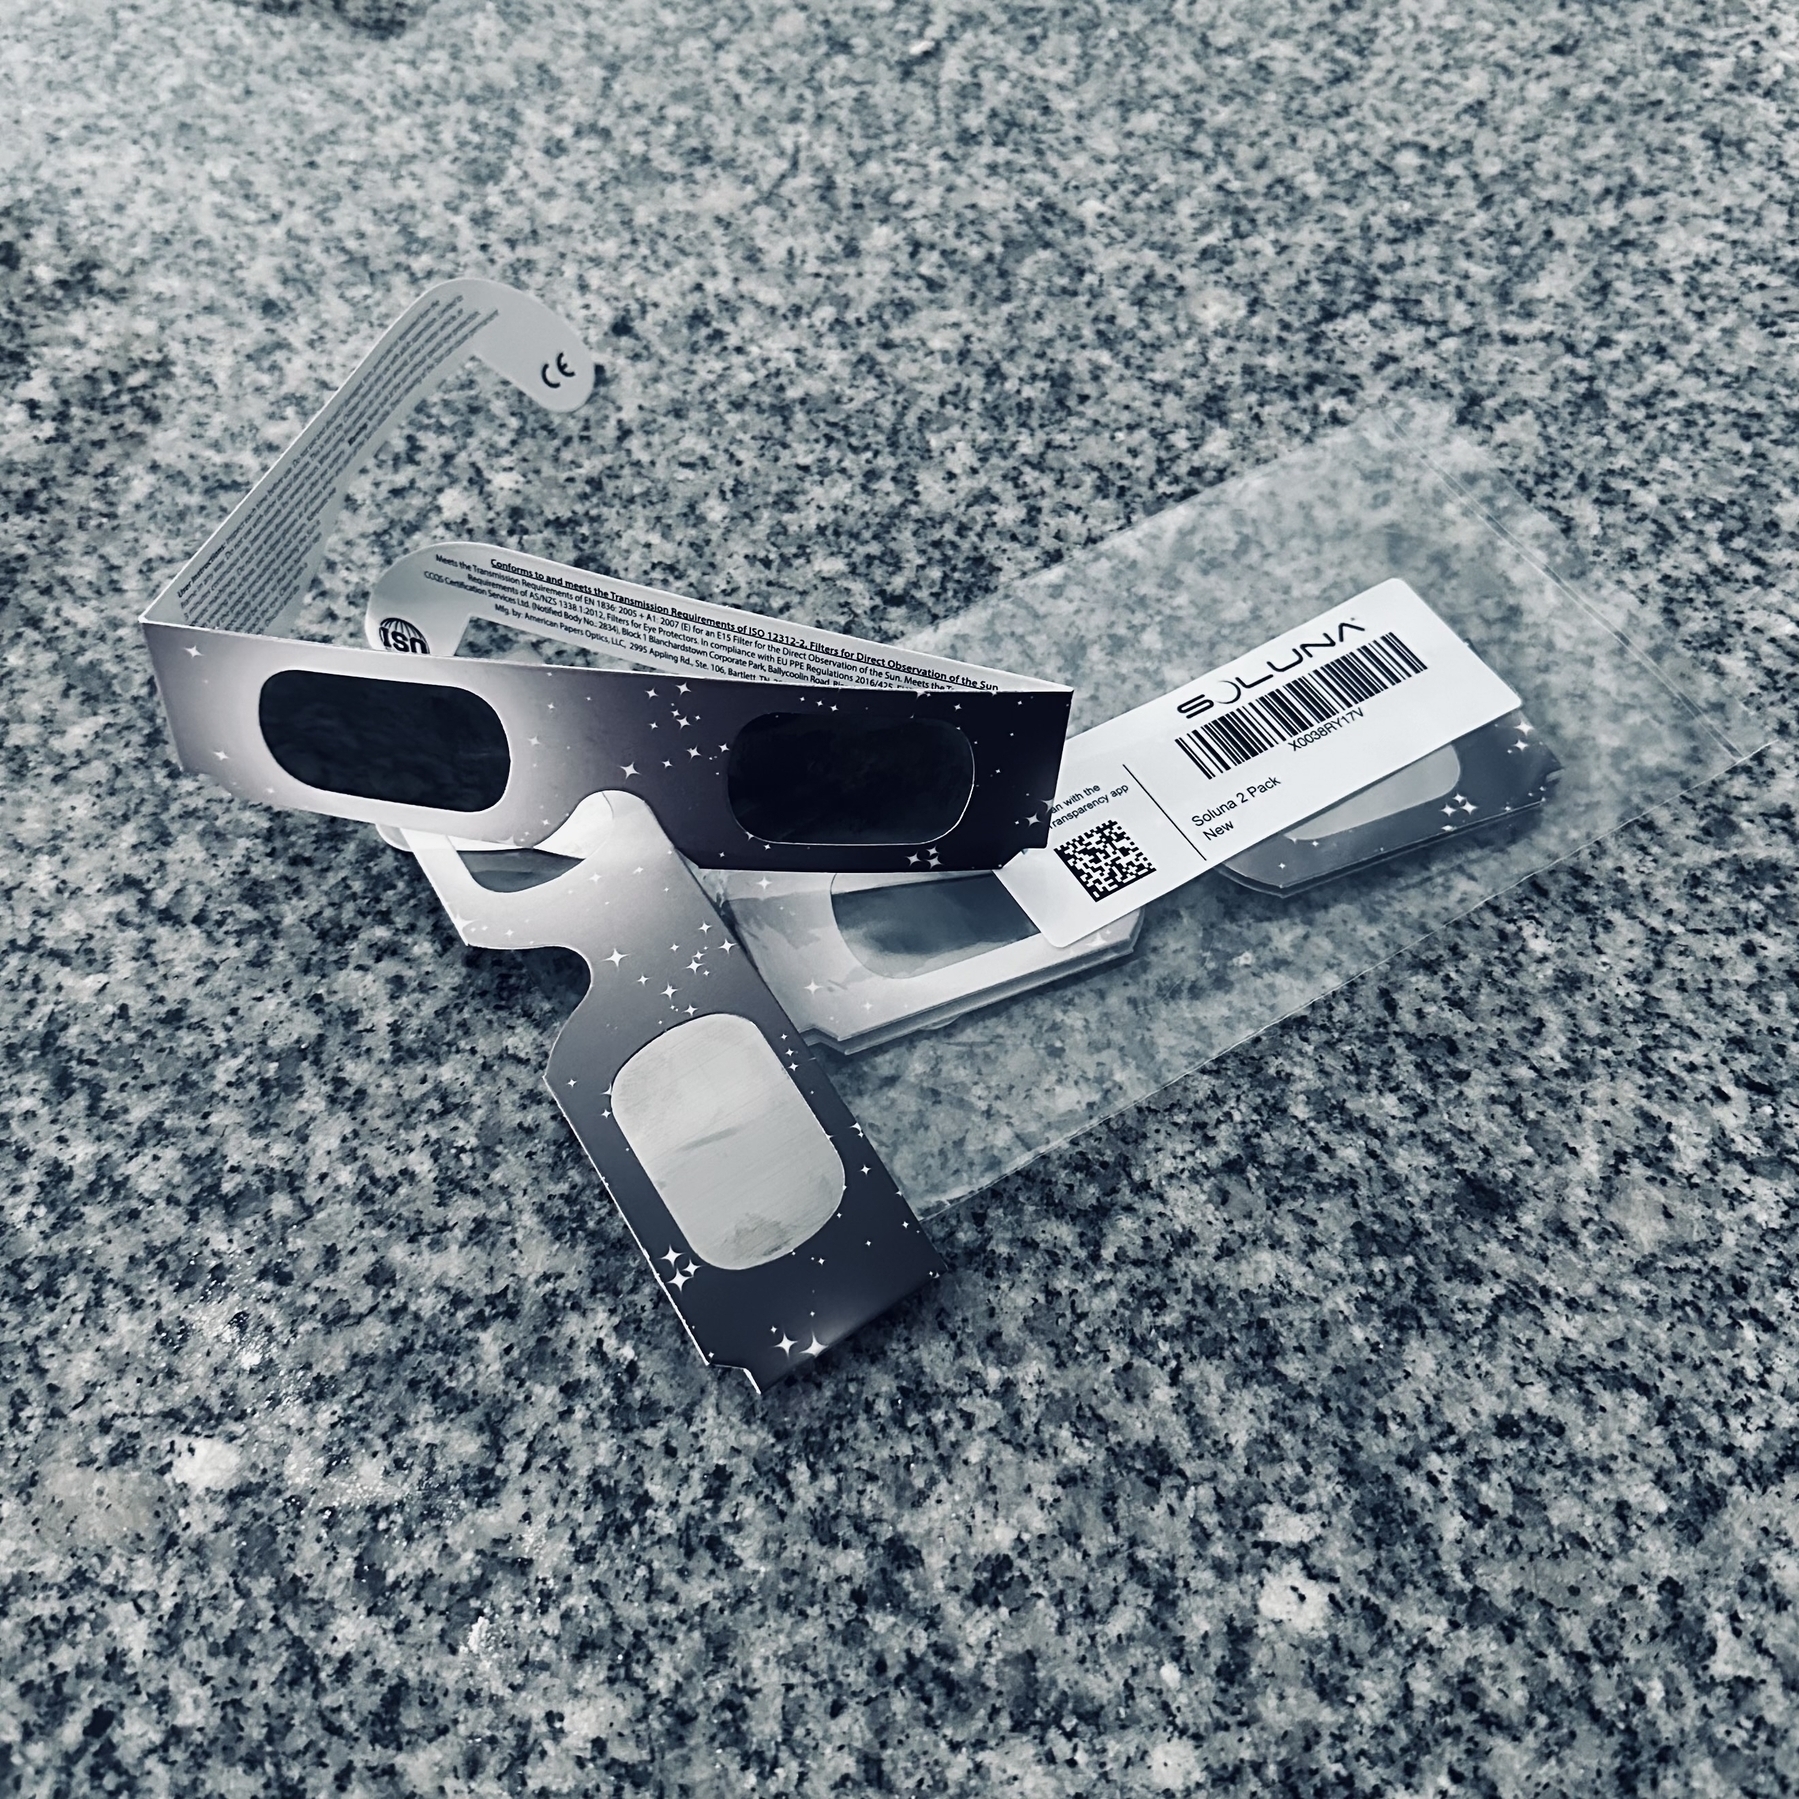 Eclipse glasses on the counter.